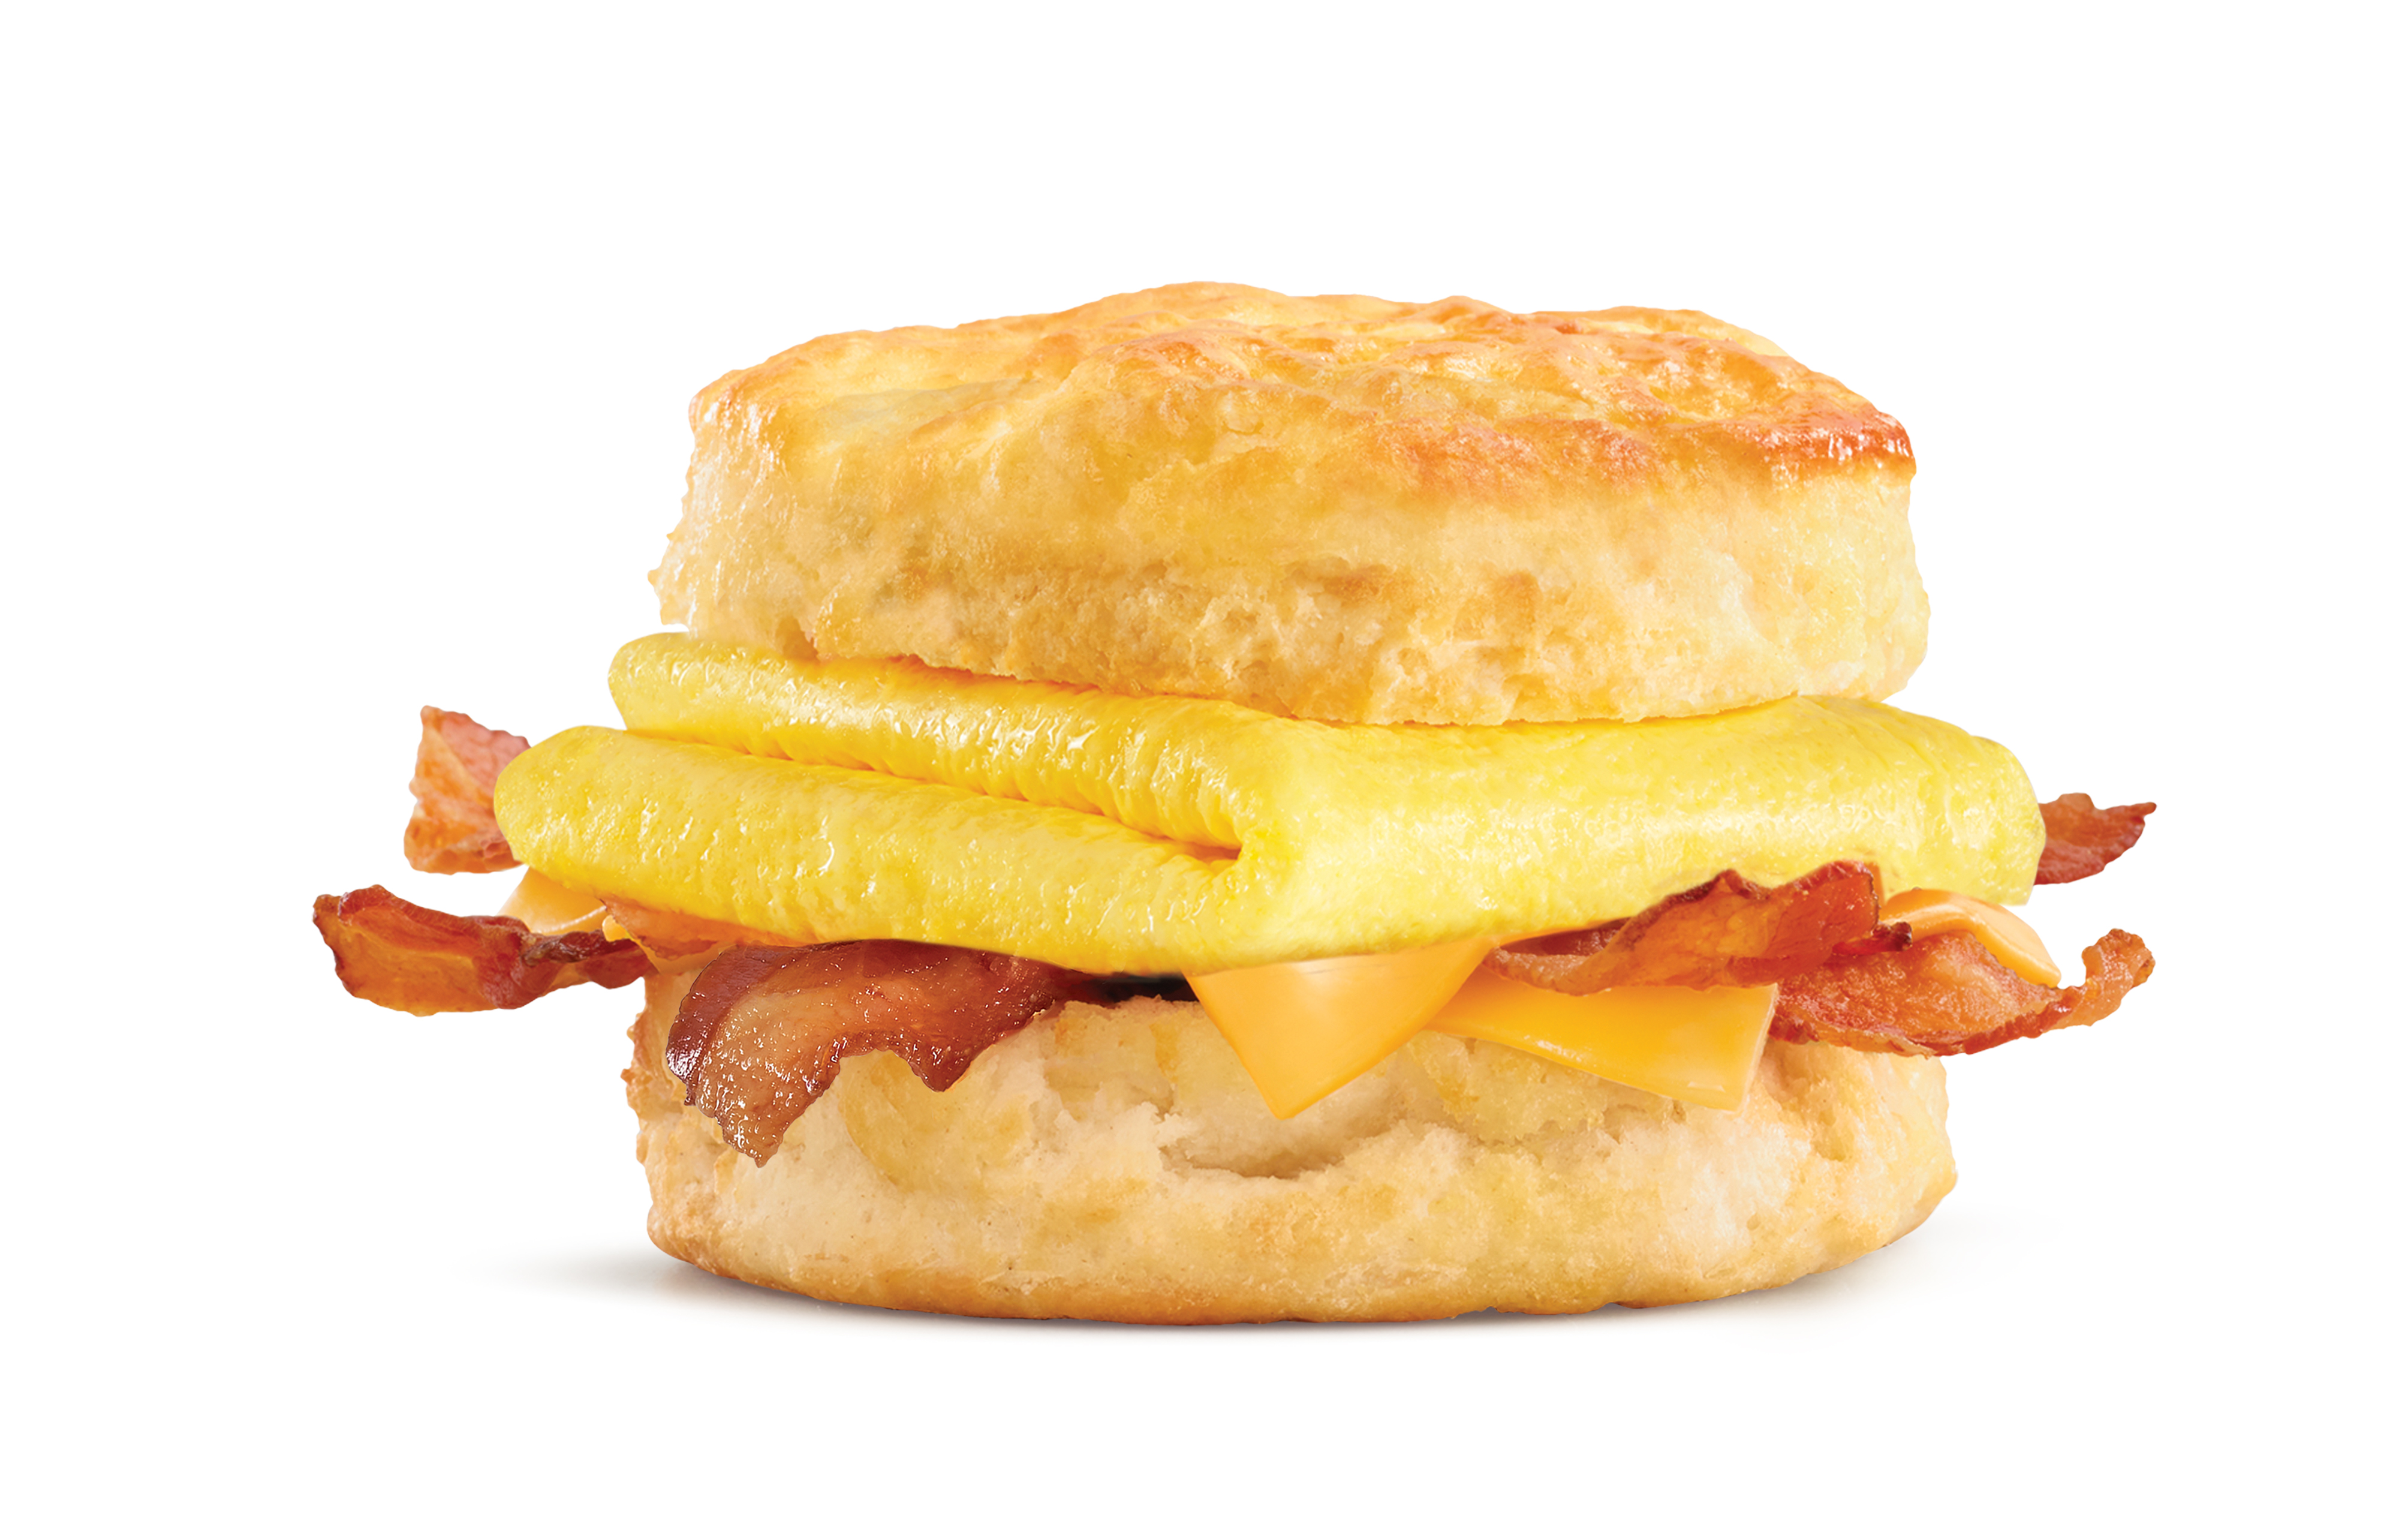 Virginia Beach man wins Hardee's biscuit maker of the year